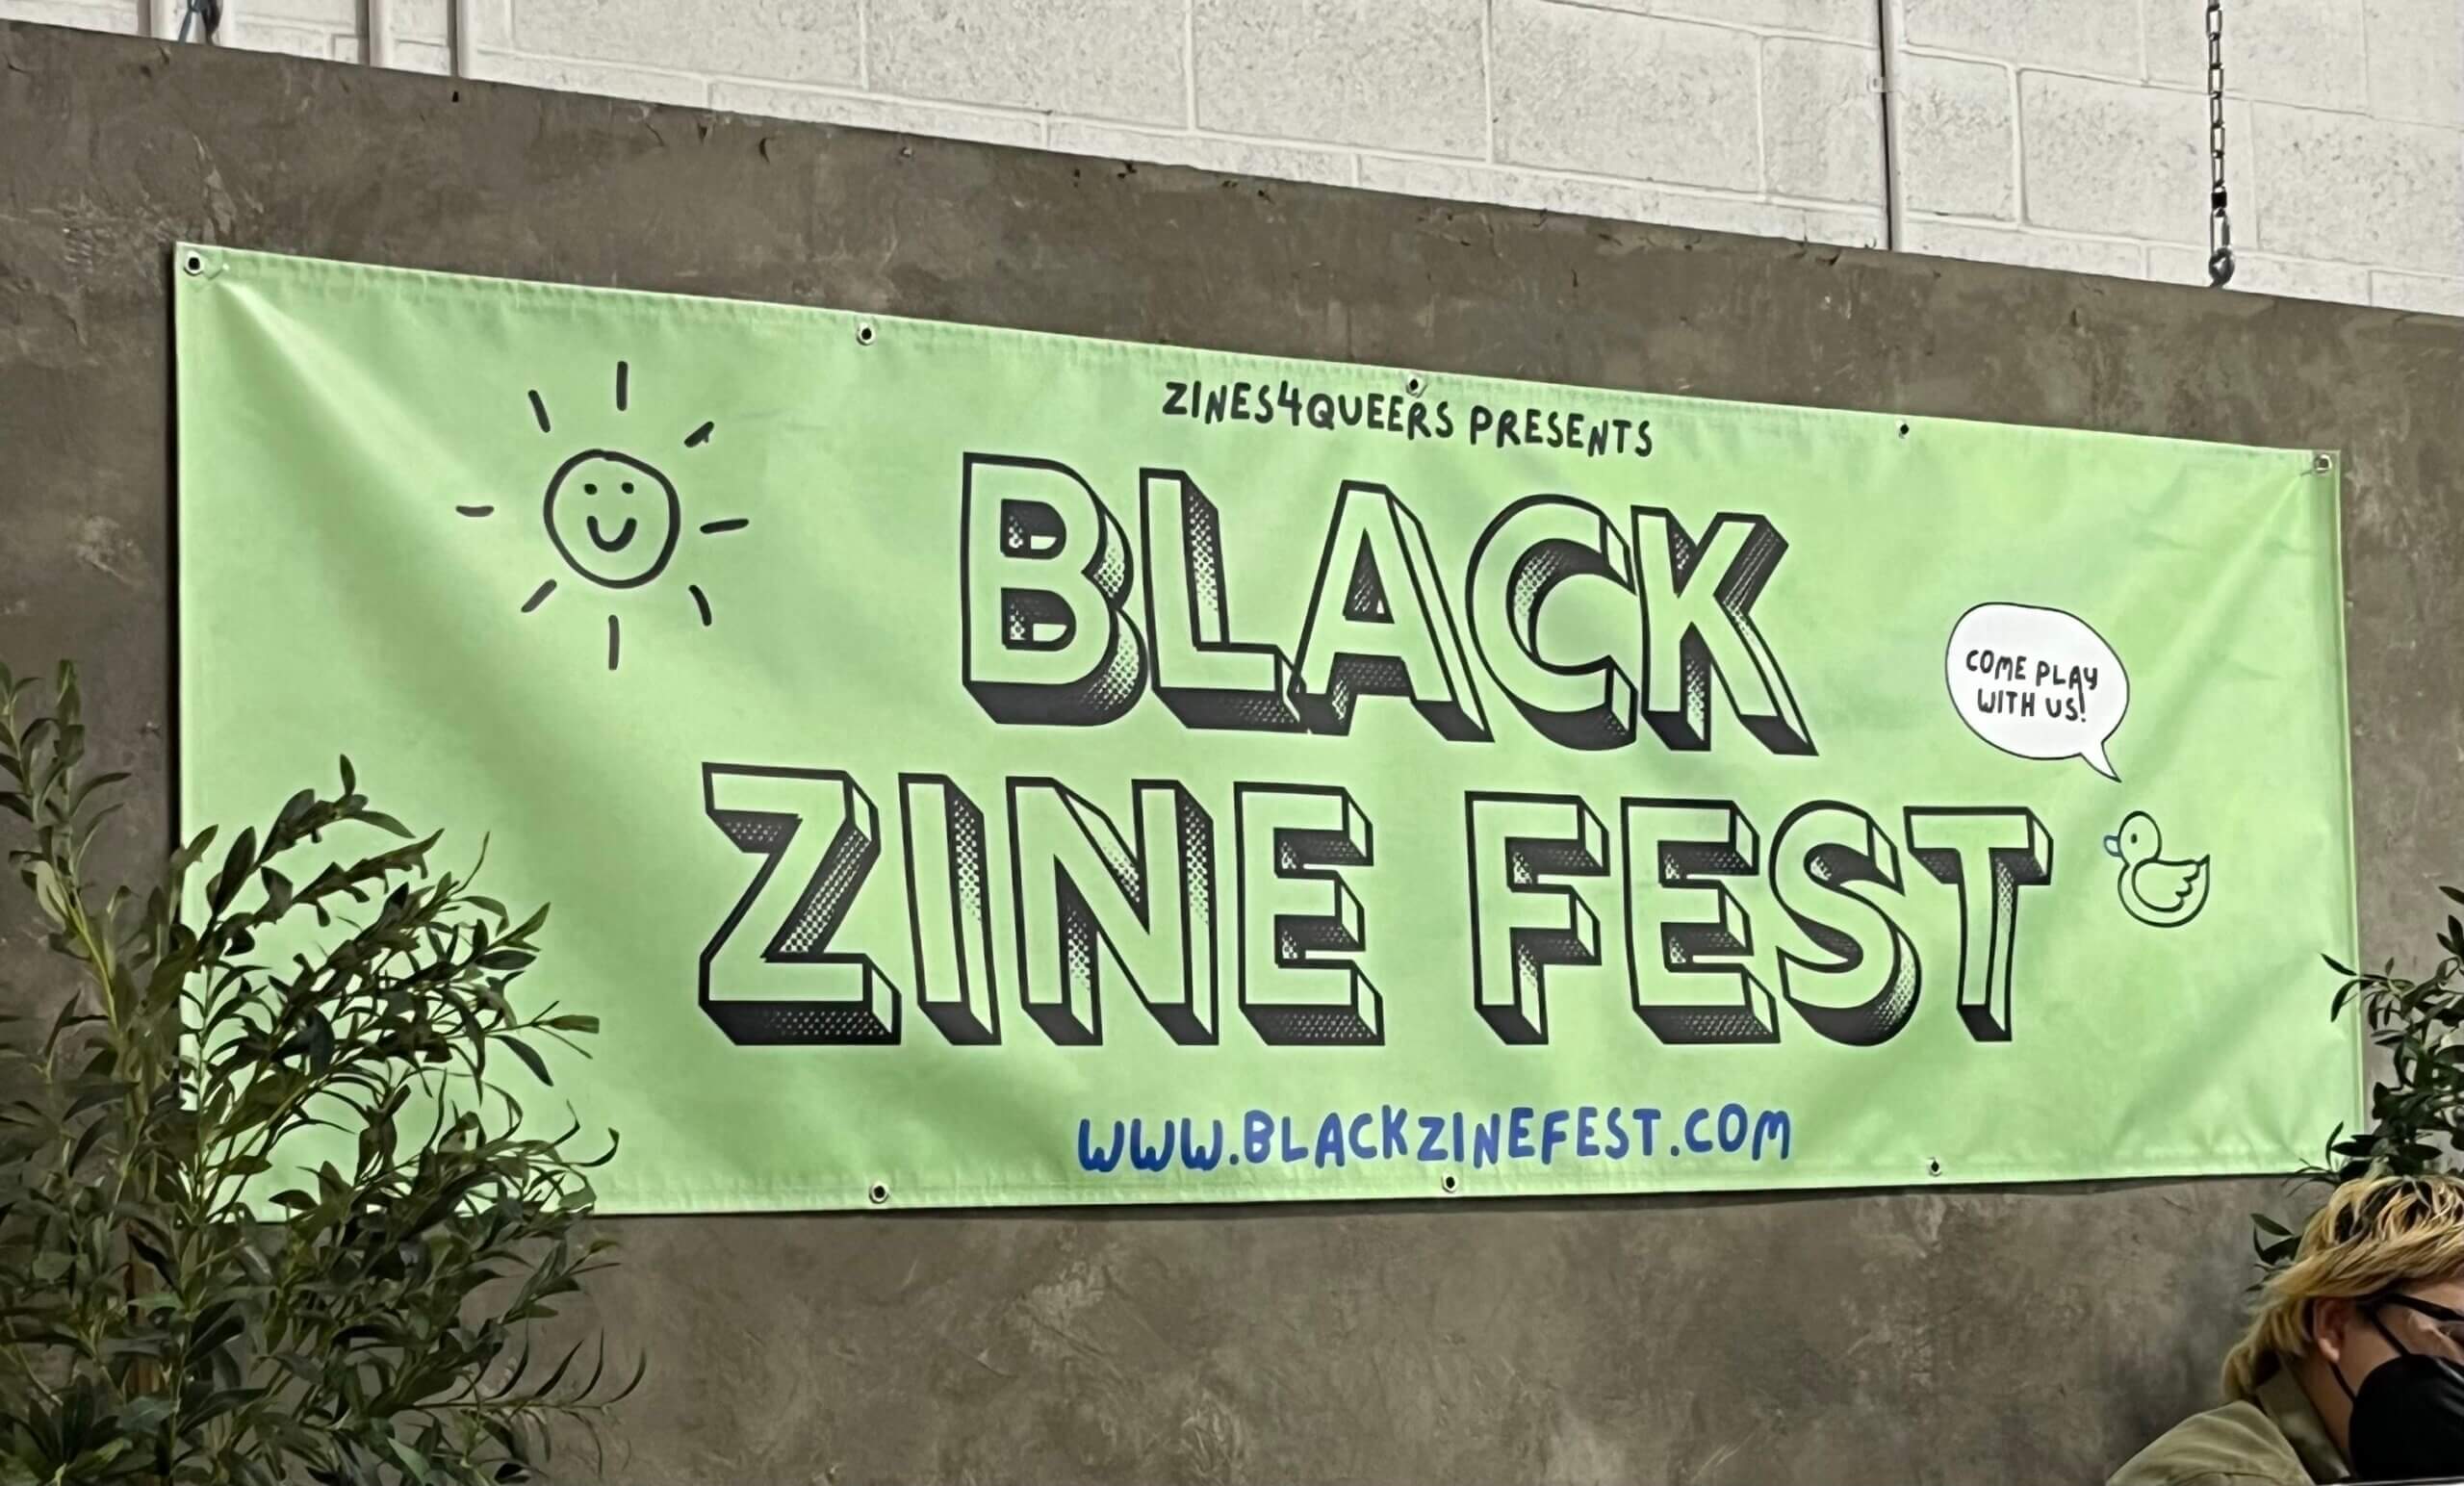 A green banner hangs on a grey wall with large text that reads Black Zine Fest in handwritten capitol letter font